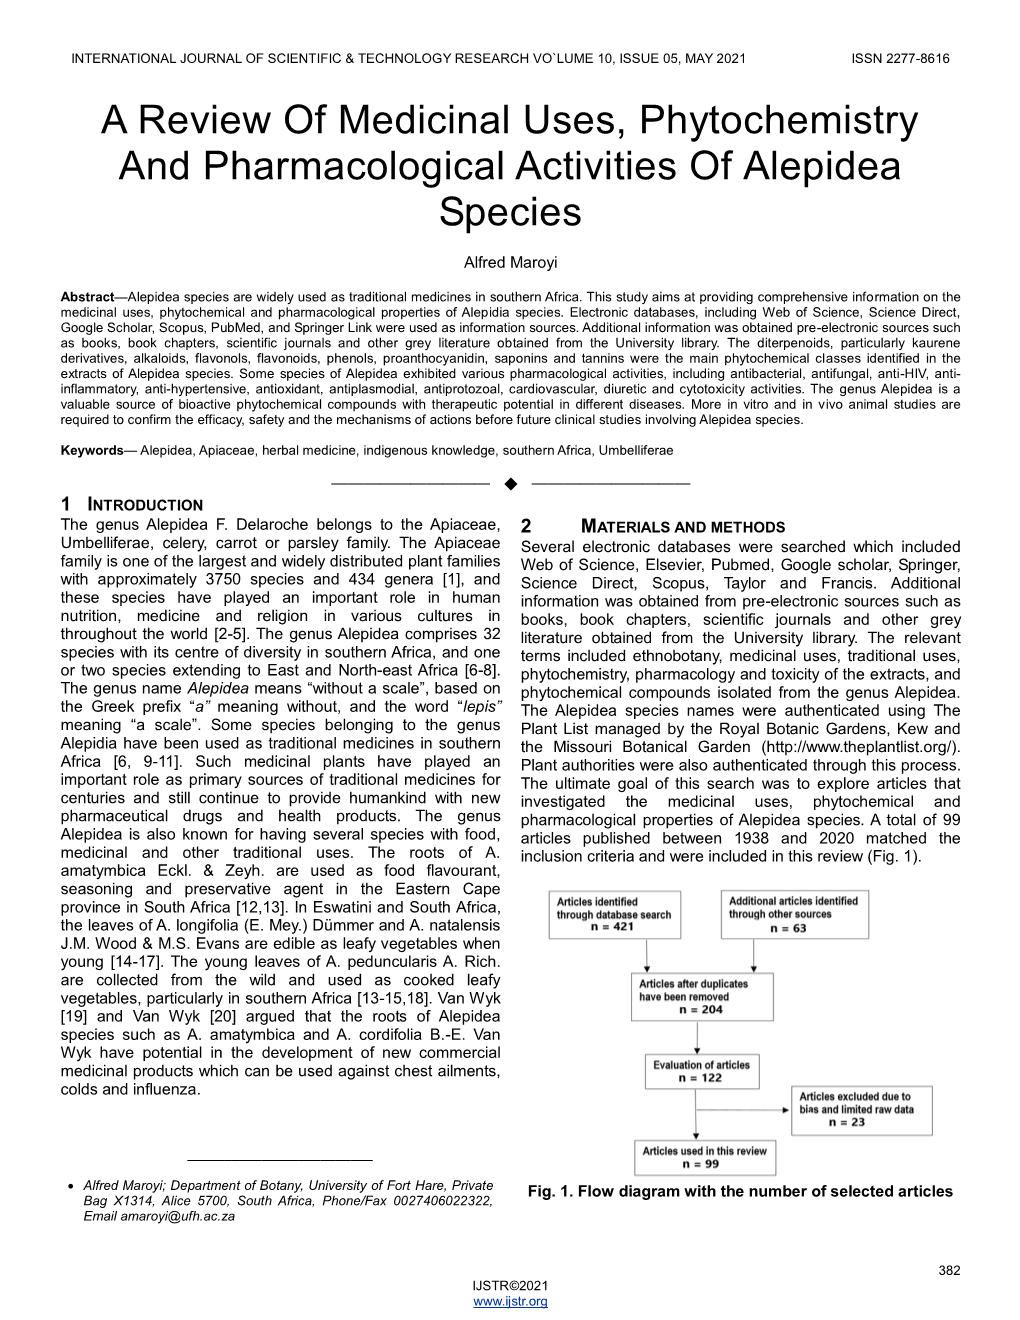 A Review of Medicinal Uses, Phytochemistry and Pharmacological Activities of Alepidea Species